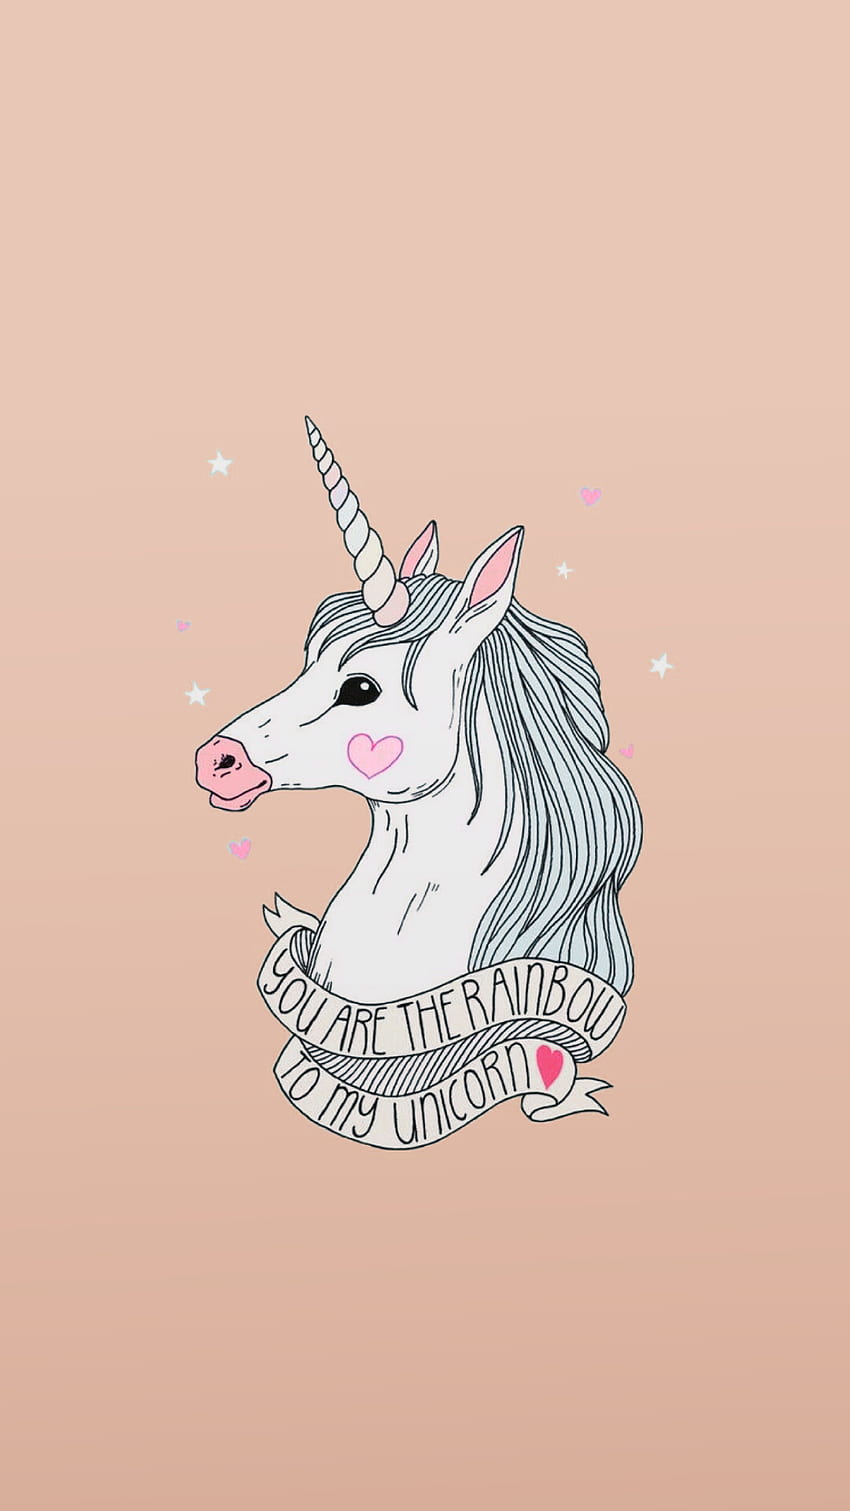 IPhone wallpaper unicorn cute pink stars heart background you are the reason why I smile - Unicorn